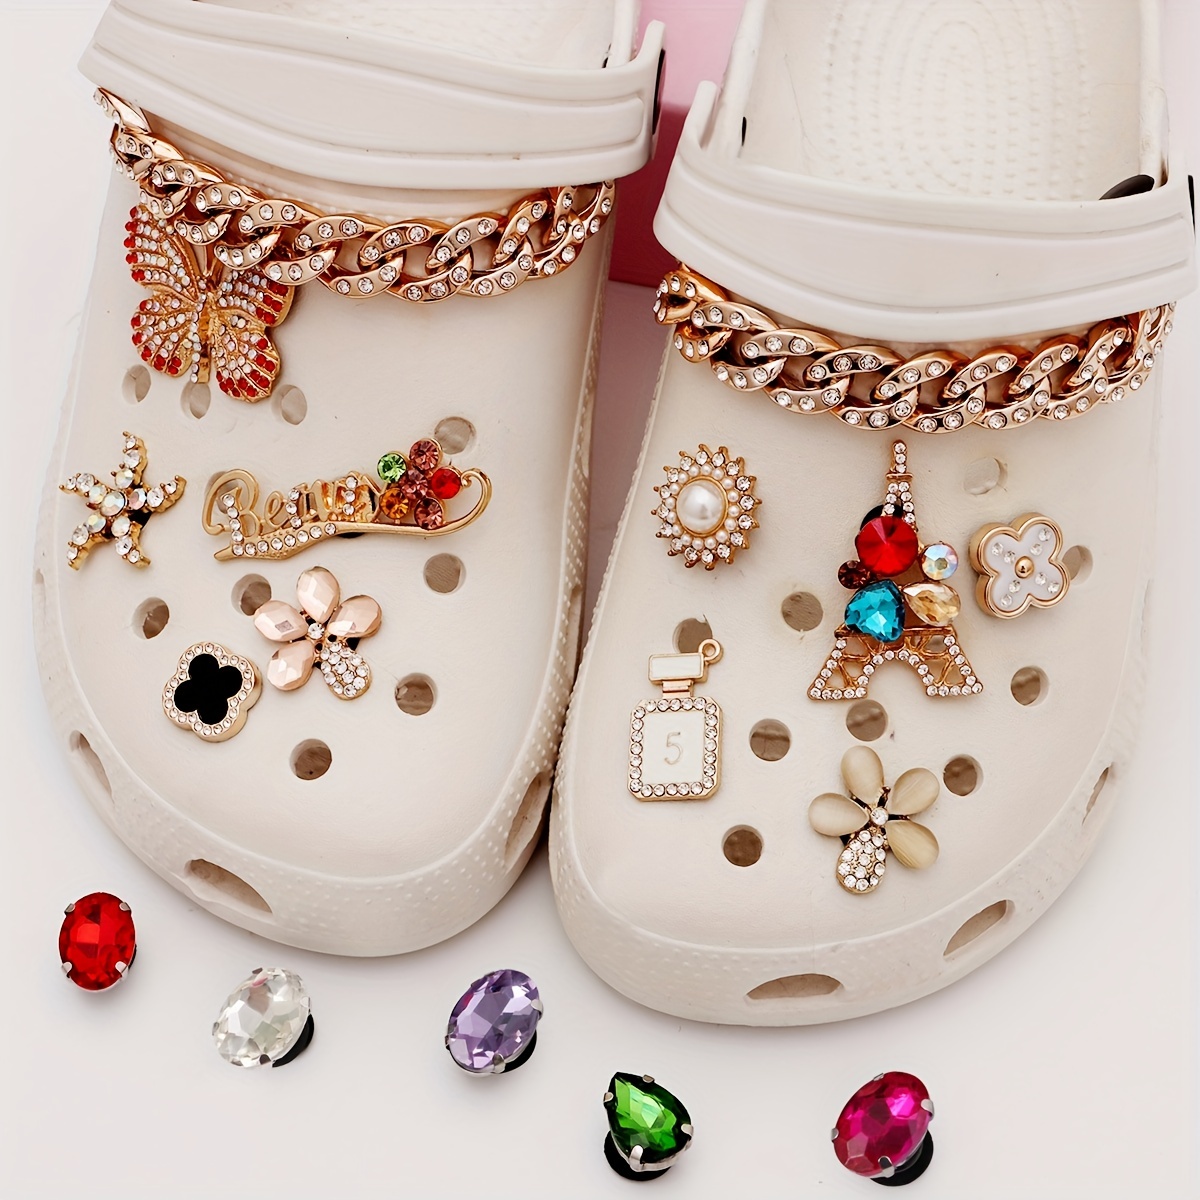 Bling Shoe Charms Fits For Pet Shoes With Chains Designer Diamond